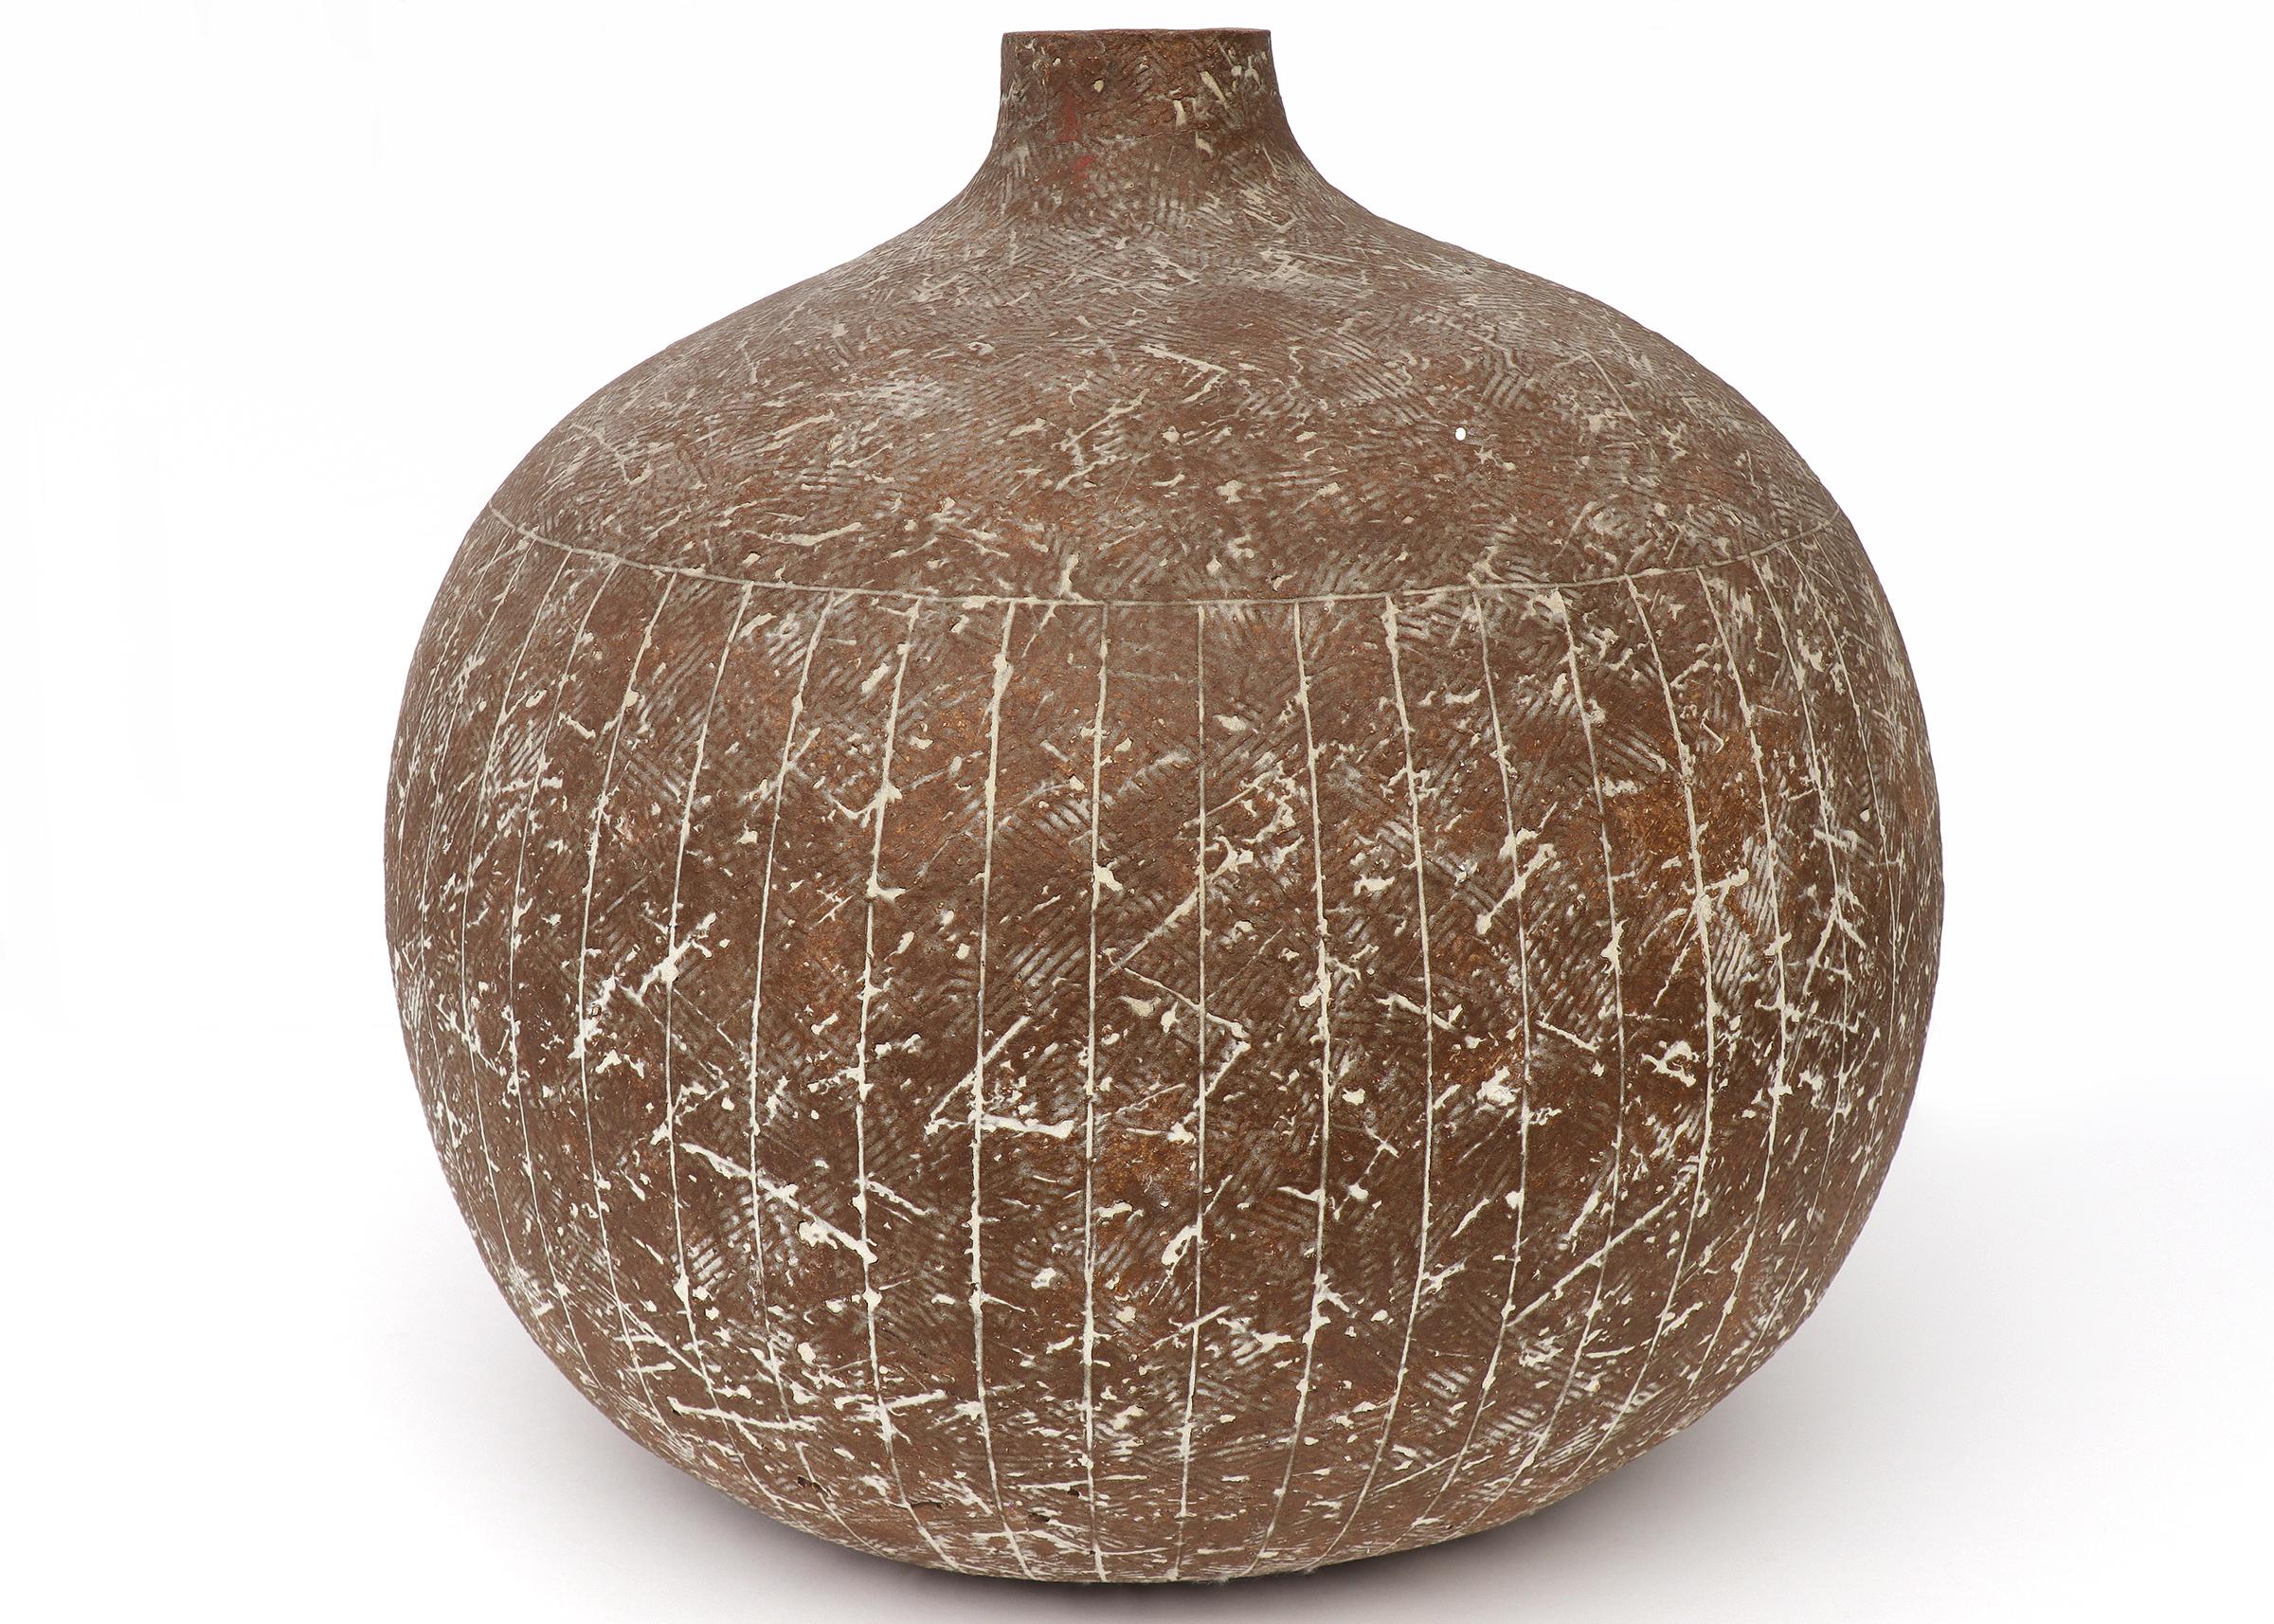 Brown ceramic pot with white parallel lines and etchings throughout by 20th Century artist Claude Conover. Narrow opening at the top, signed and titled on the base. Dimensions measure at 16 inches height and 16 inches in diameter.

Piece is clean